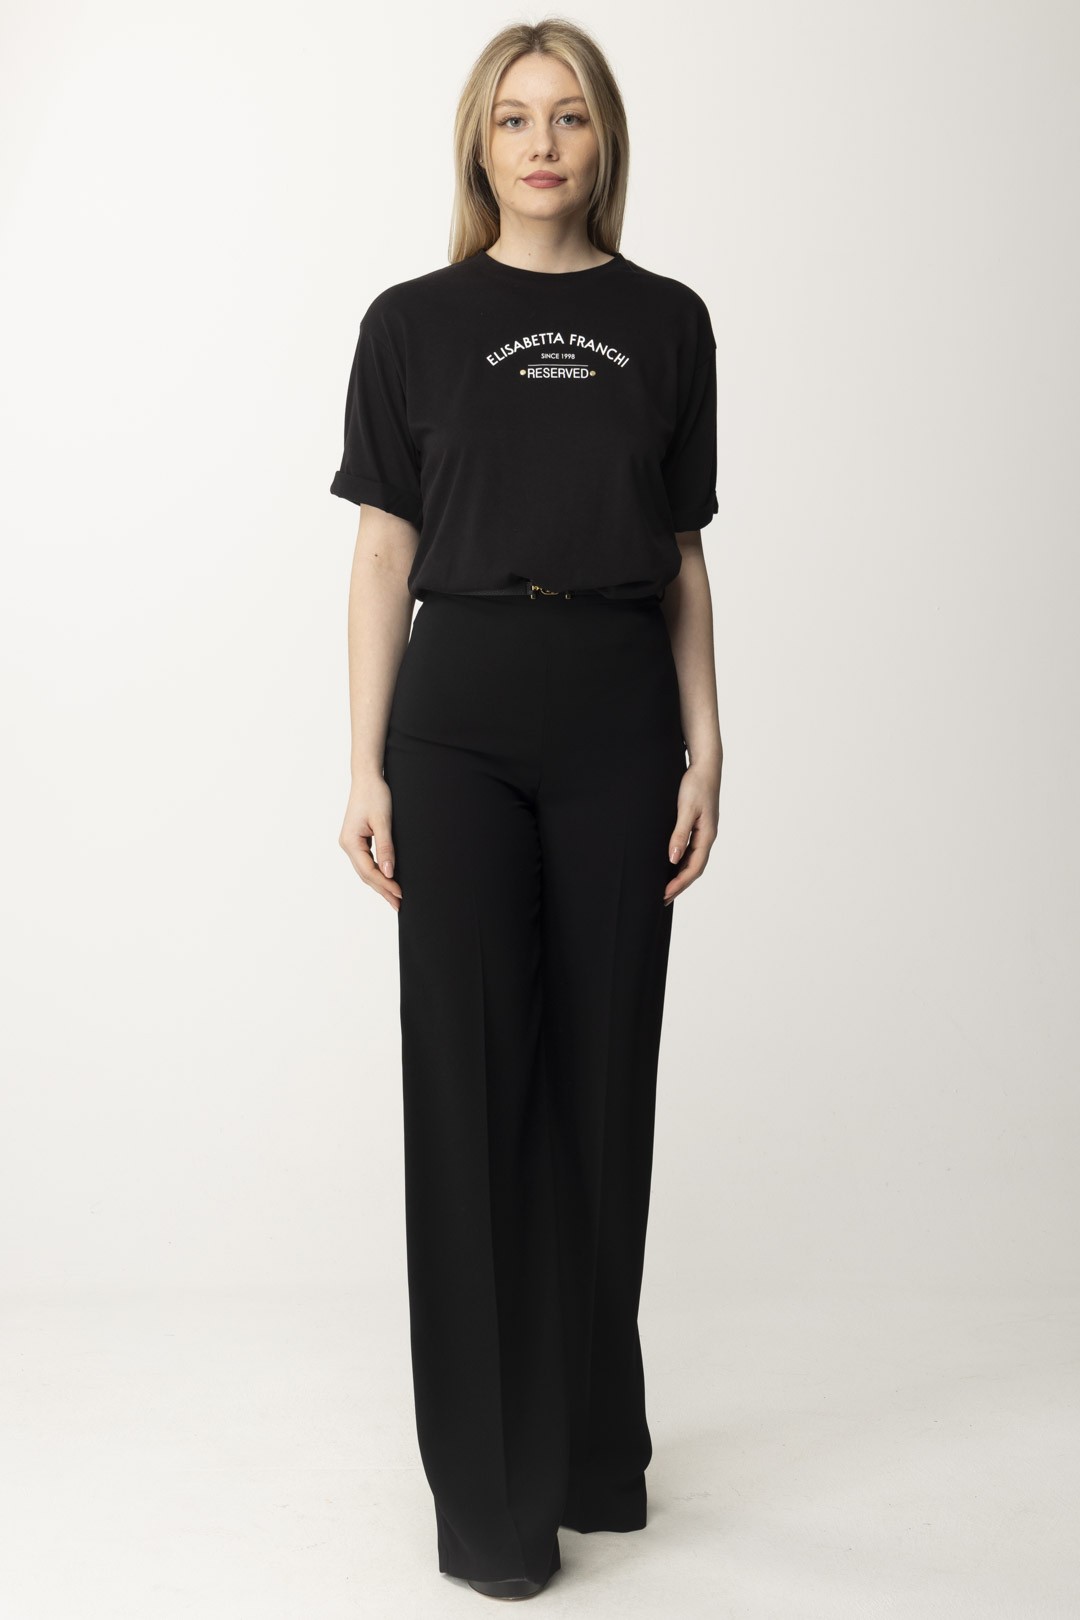 Preview: Elisabetta Franchi T-shirt with Reserved Print Nero